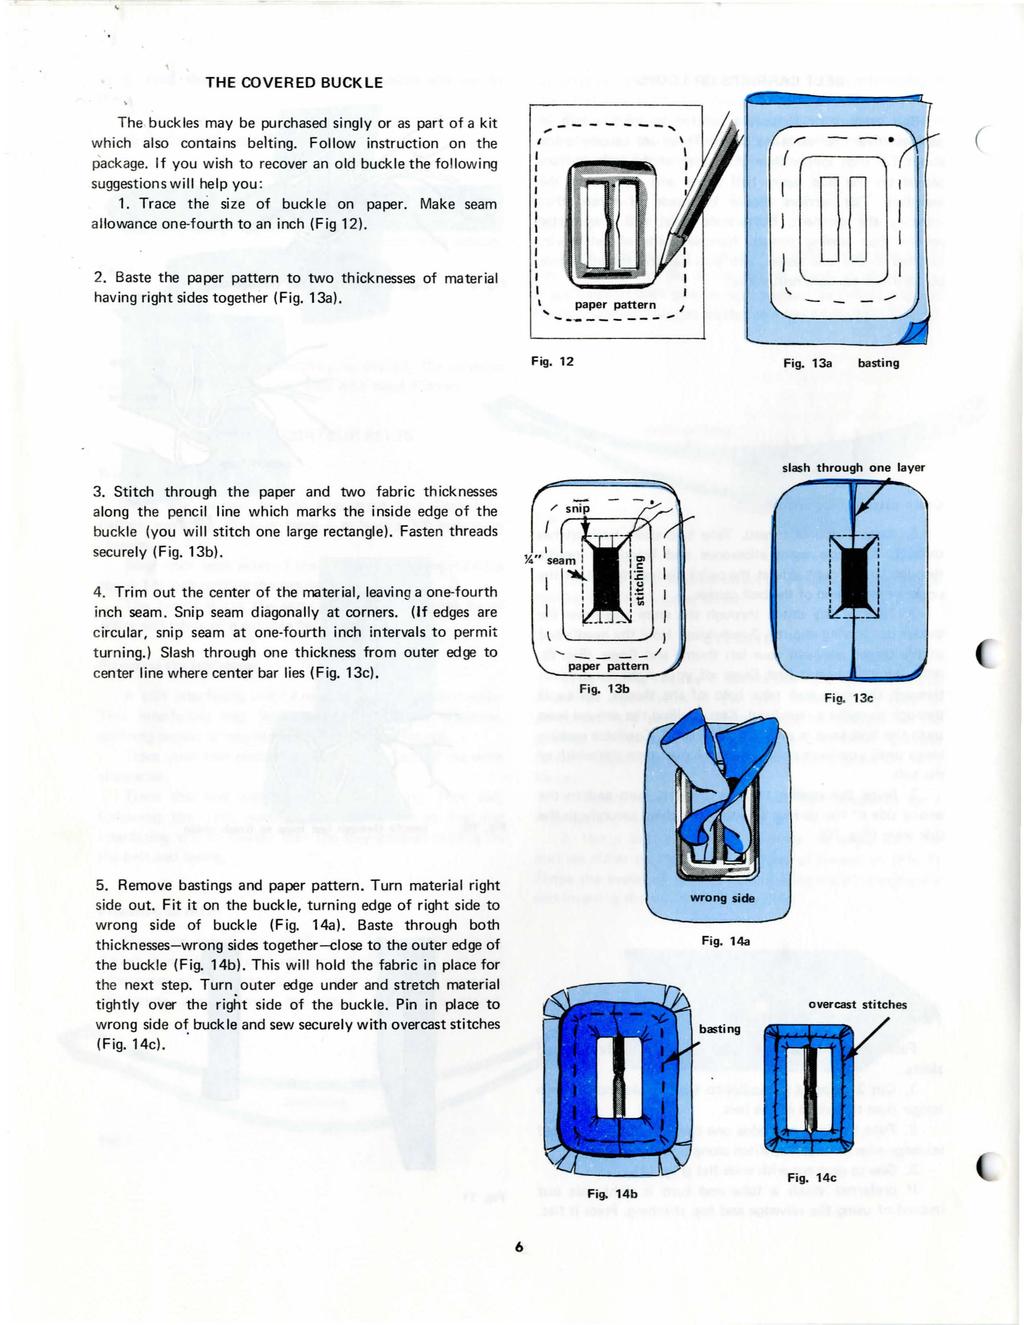 THE COVERED BUCKLE The buckles may be purchased singly or as part of a kit which also contains belting. Follow instruction on the package.